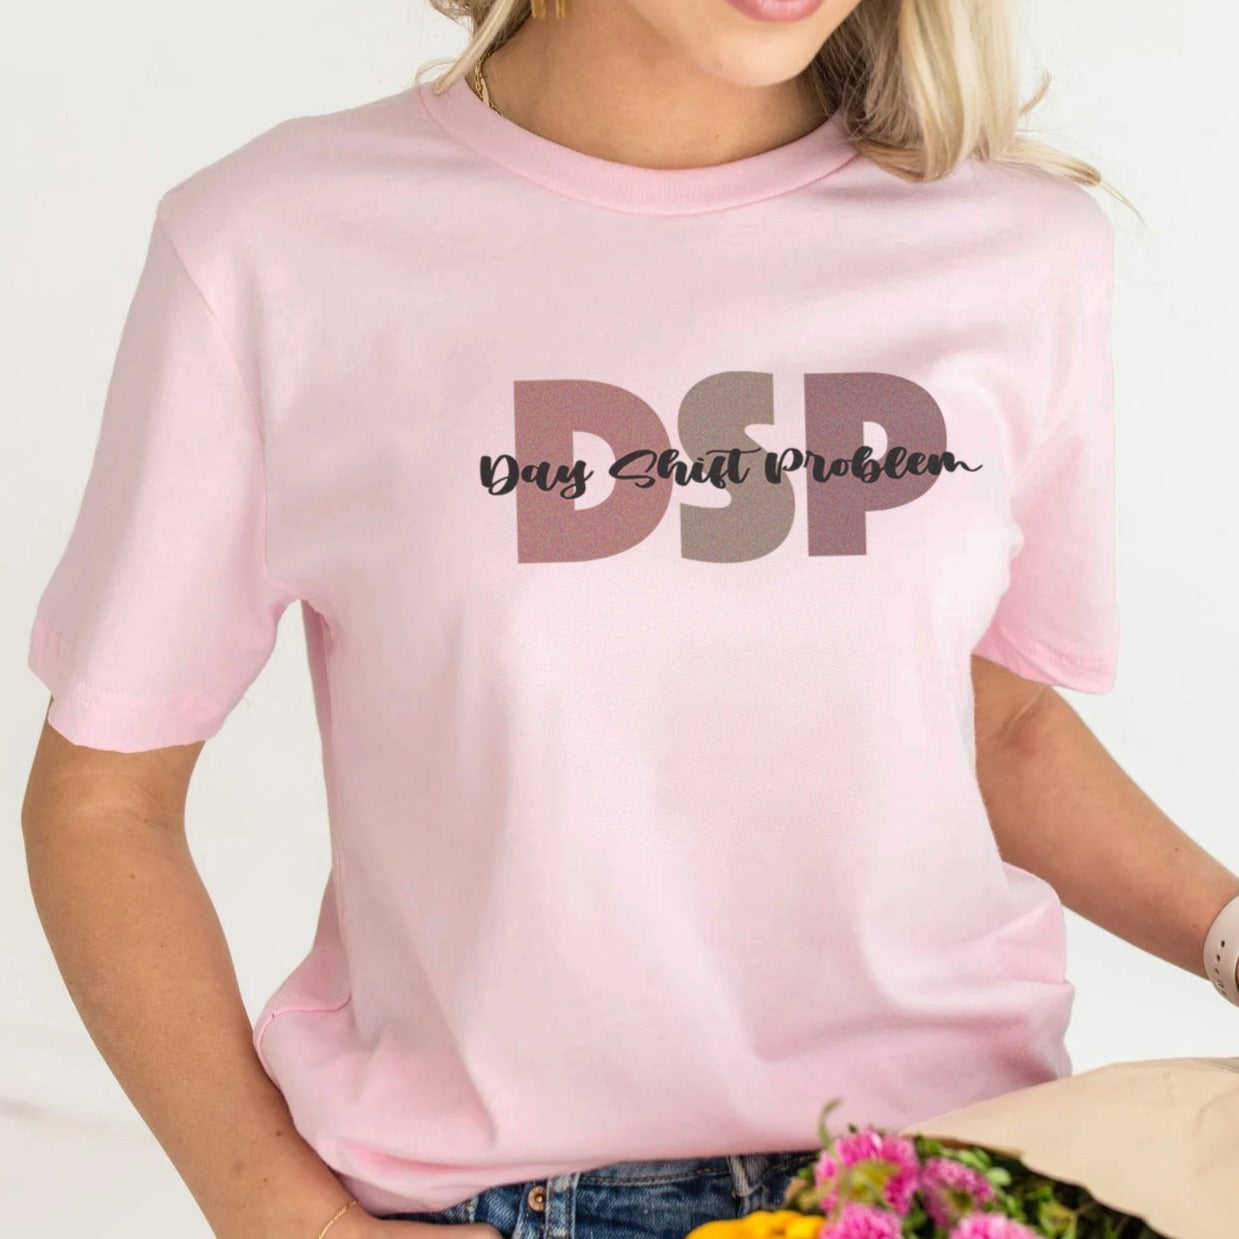 DSP Day Shift Problem T-Shirt